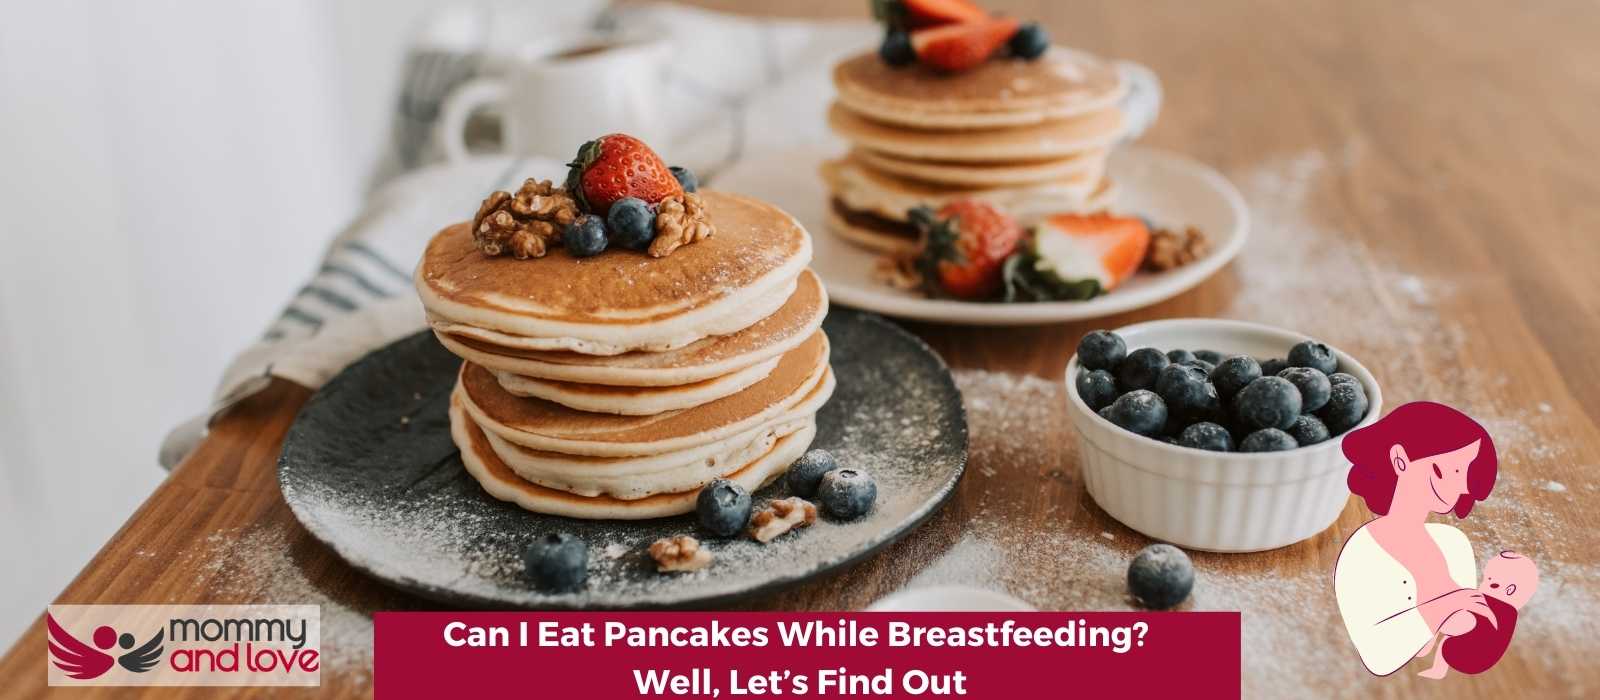 Can I Eat Pancakes While Breastfeeding Well, Let’s Find Out